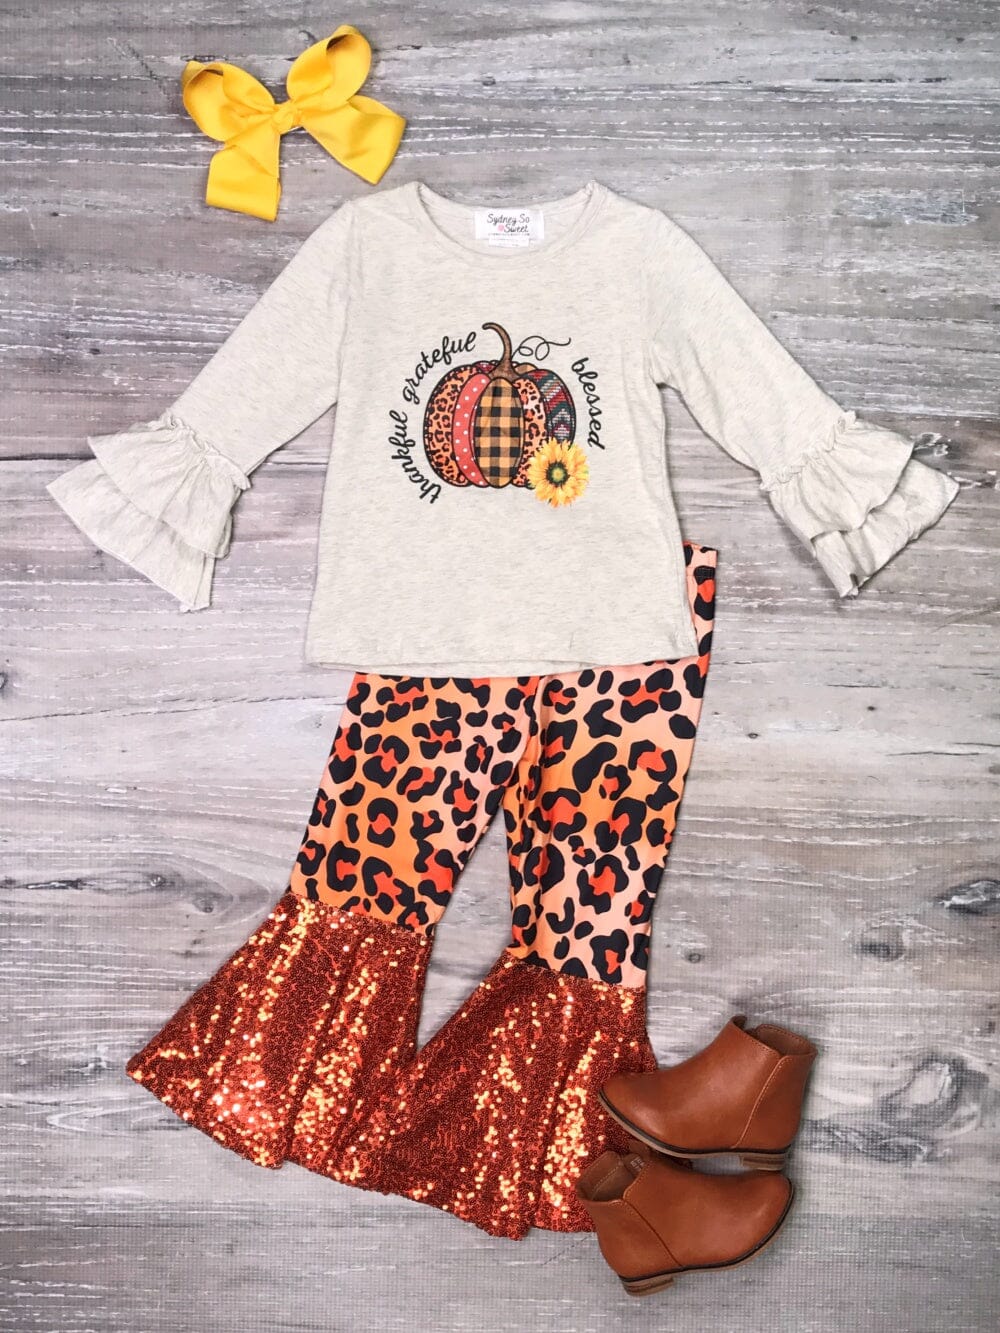  Baby Girls Flared Pants Outfit - Ruffle Tops Shirt & Leopard  Print Long Bell-Bottoms Pants - Sisters Matching Set (Polka Dot, 5-6  Years): Clothing, Shoes & Jewelry